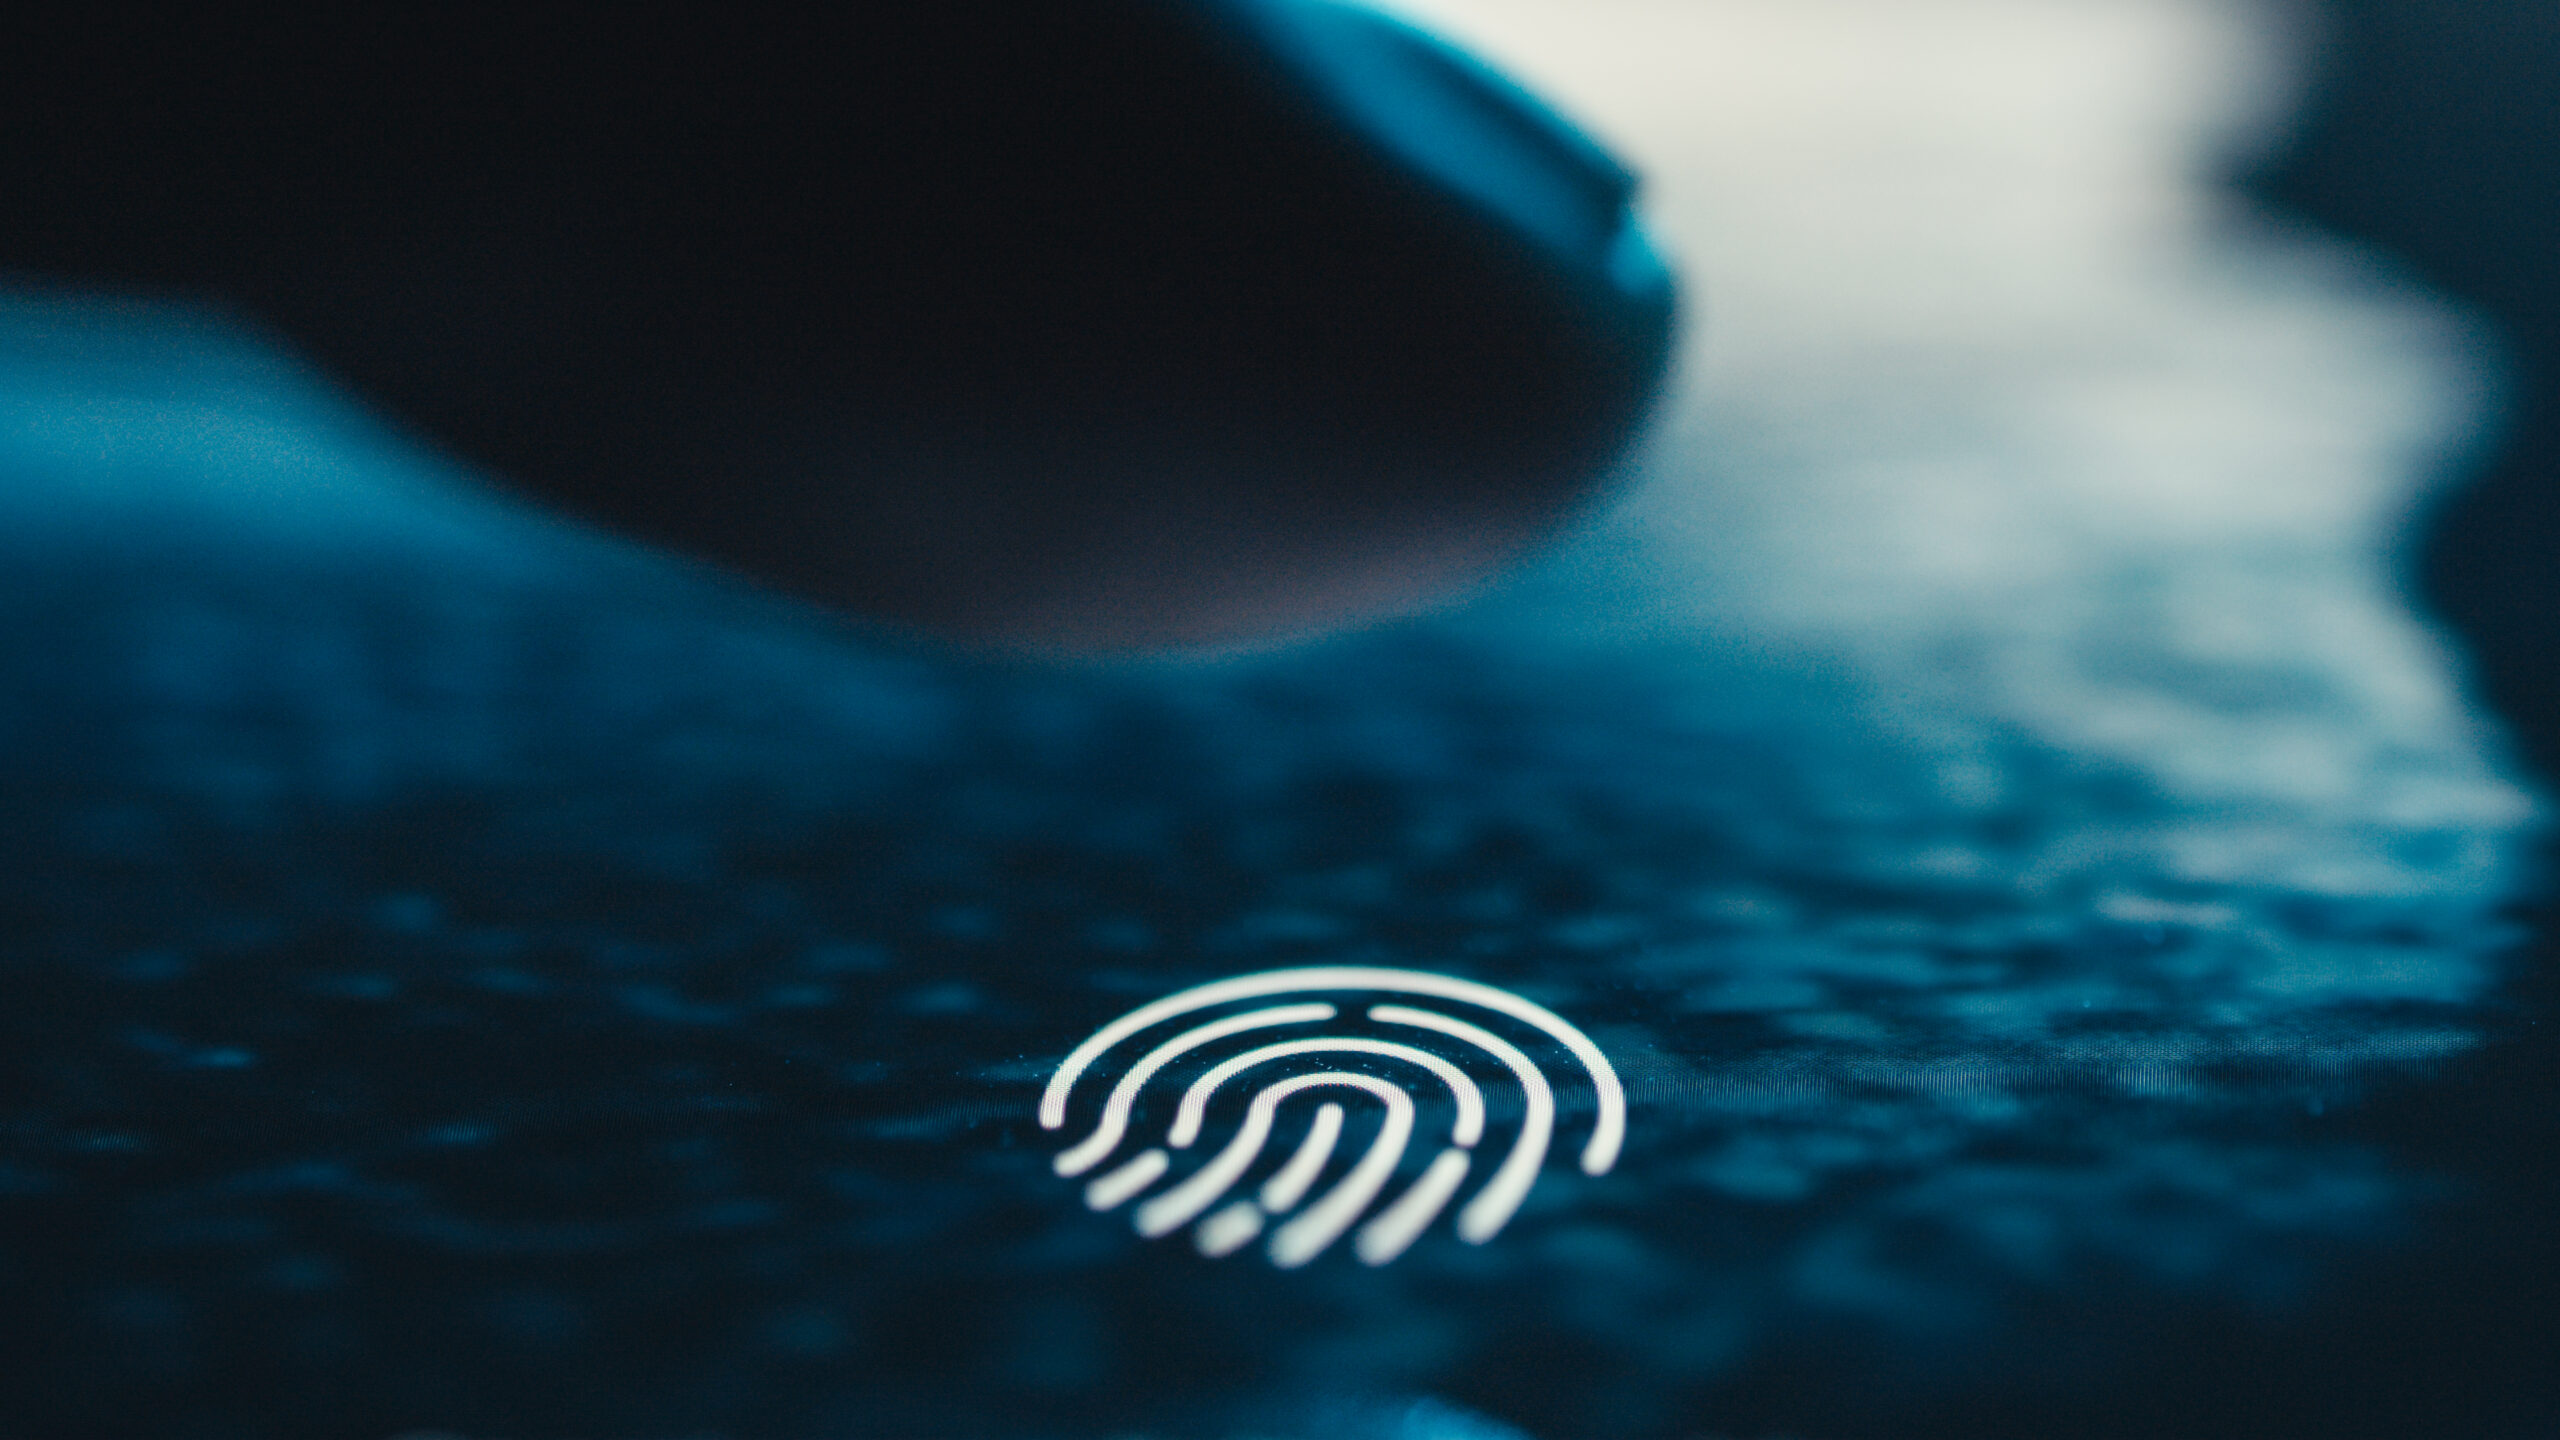 How different are Fingerprint Scanners and Iris Scanners?